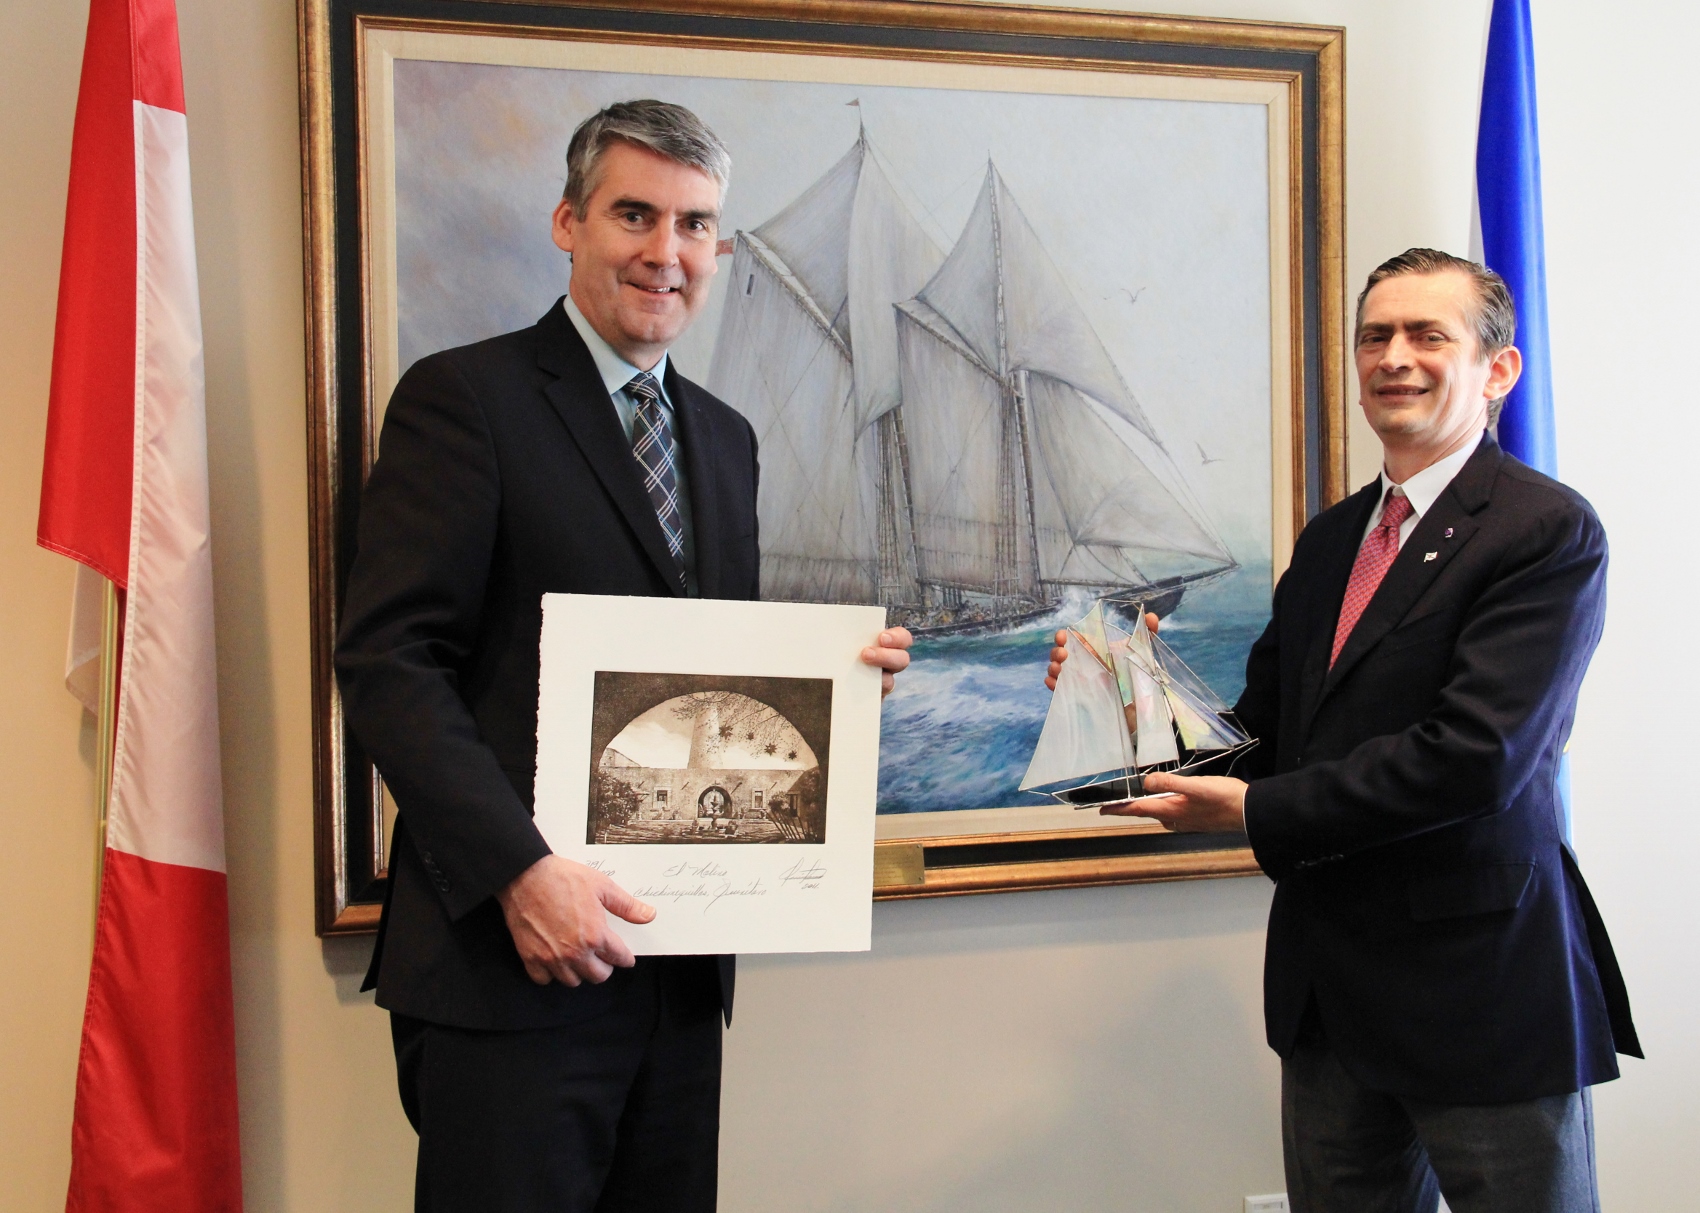 Premier McNeil met with His Excellency Agustin Garcia-Lopez Loaeza, Ambassador of the United Mexican States to Canada